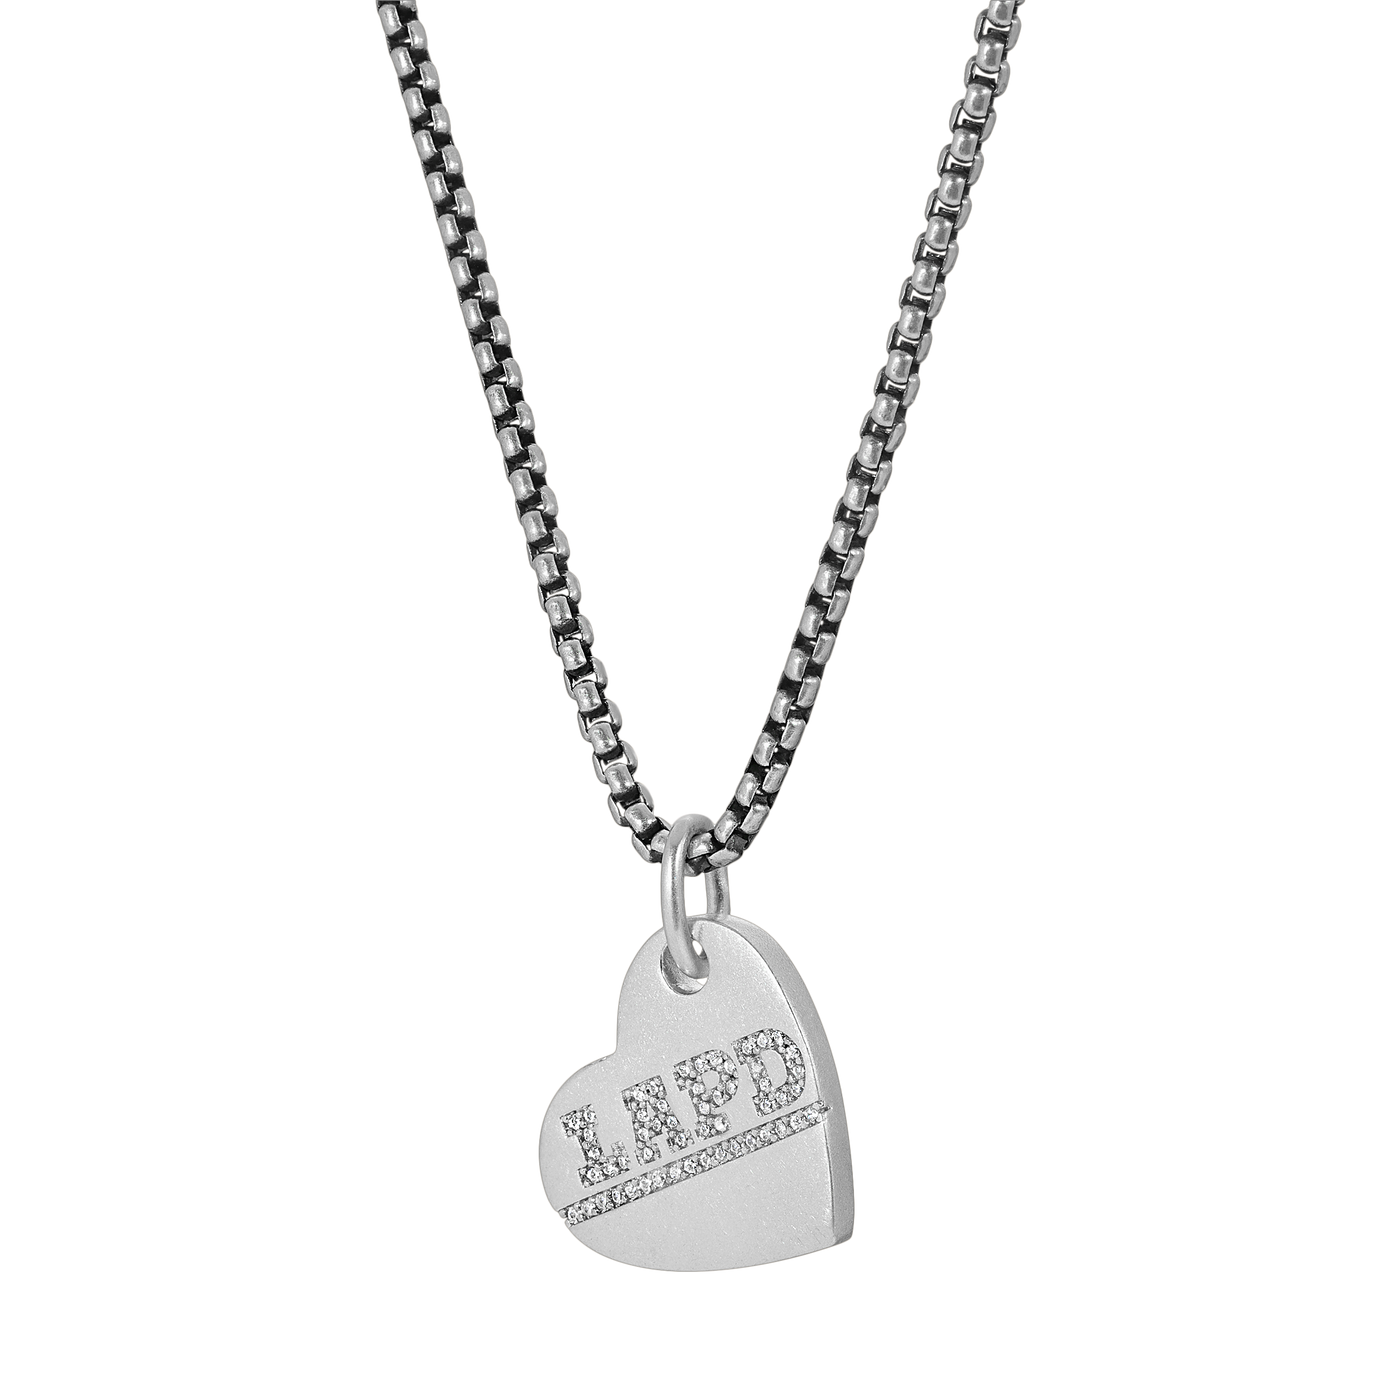 Safety Necklace in Silver